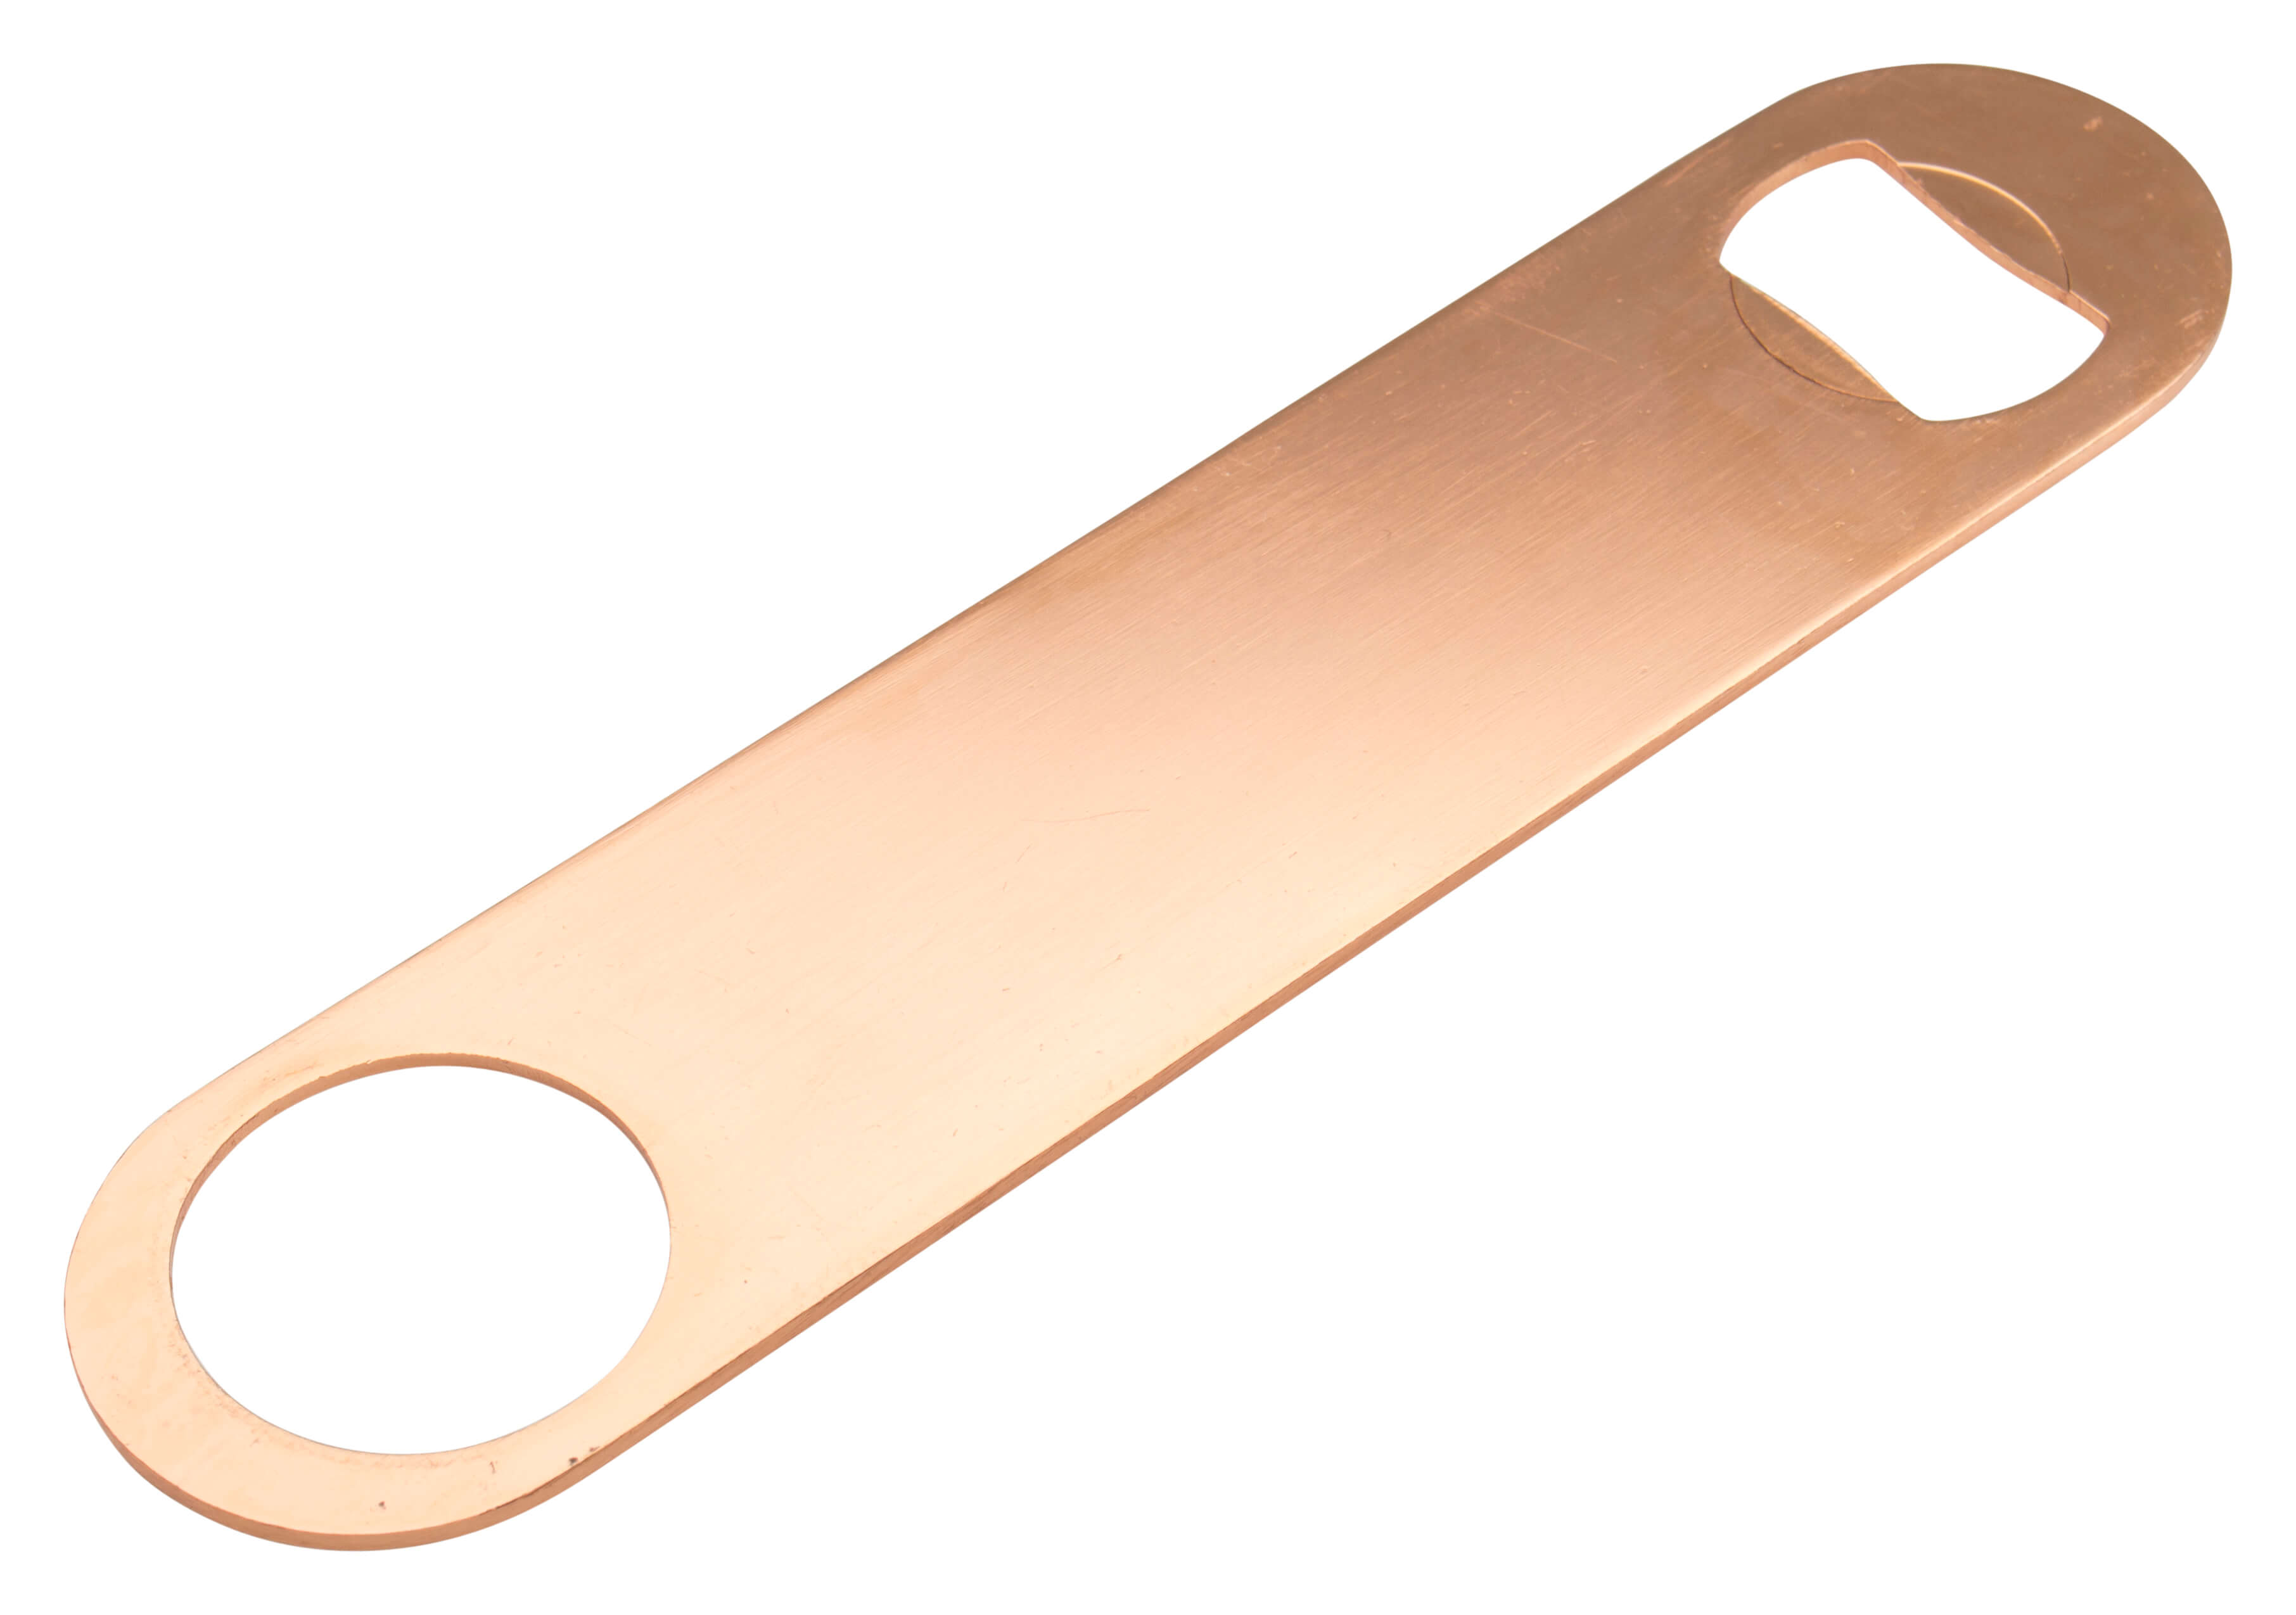 Cap lifter - speed opener, copper colored